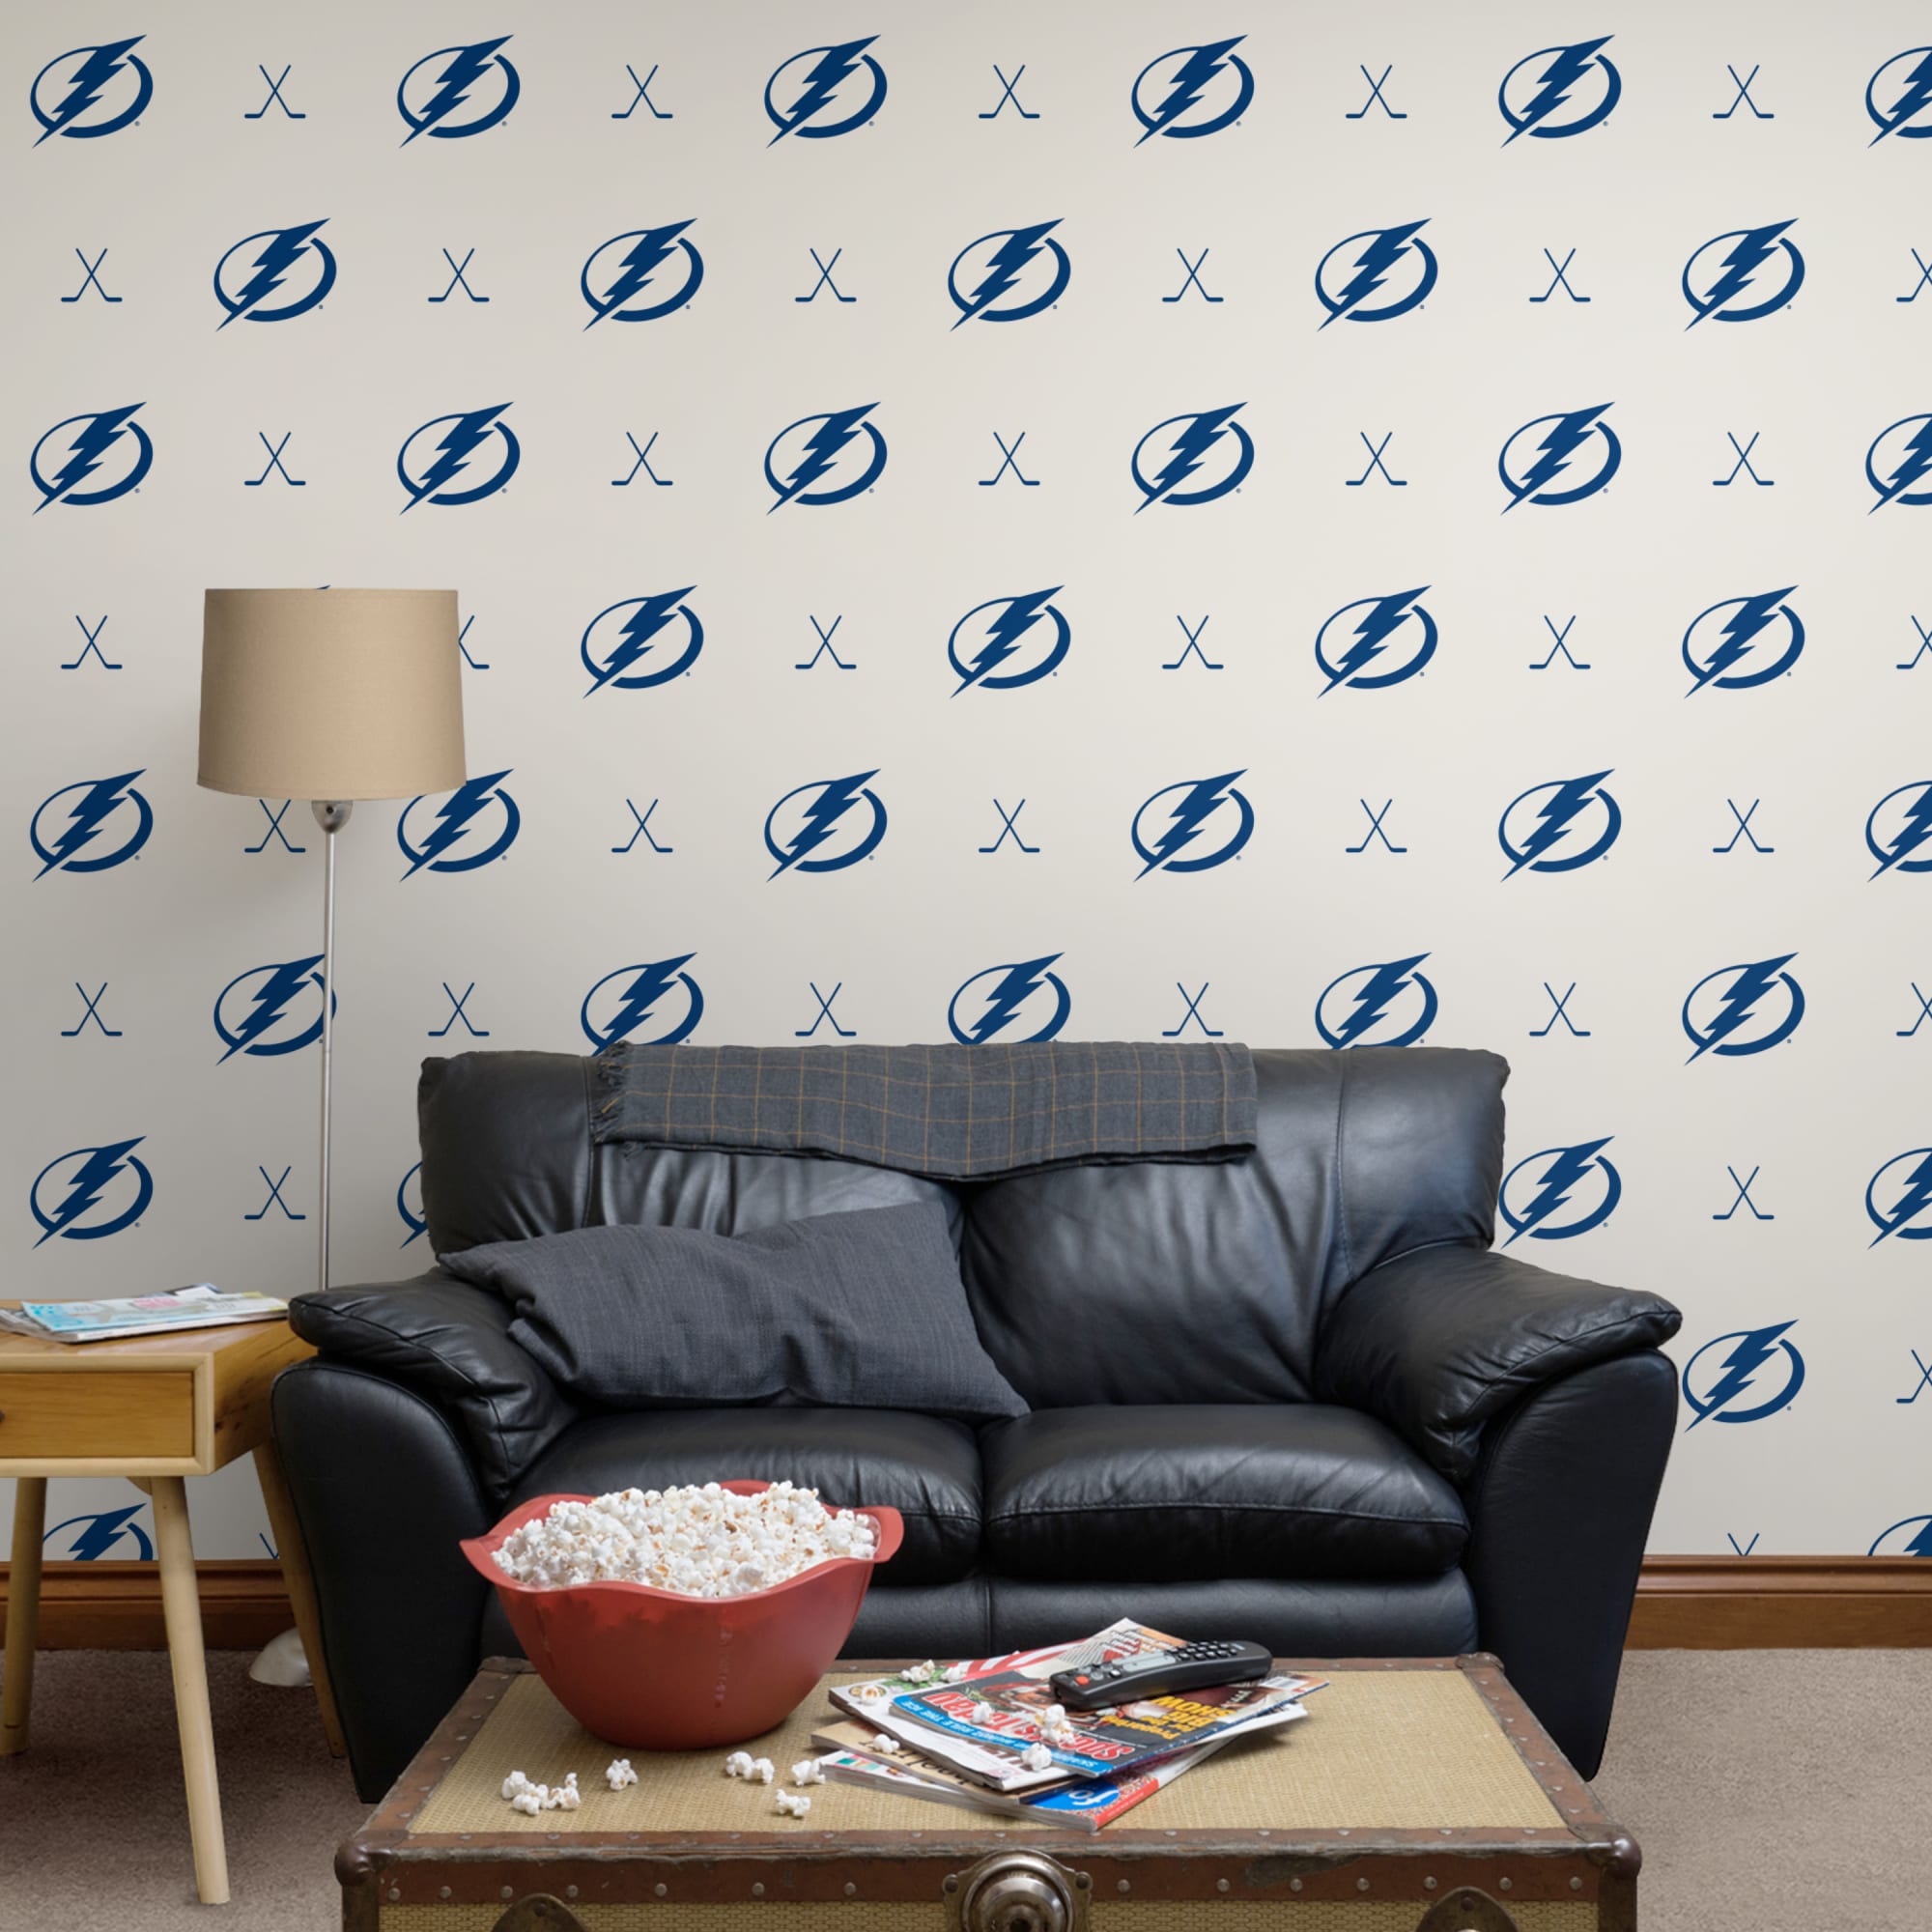 Tampa Bay Lightning: Sticks Pattern - Officially Licensed NHL Removable Wallpaper 12" x 12" Sample by Fathead